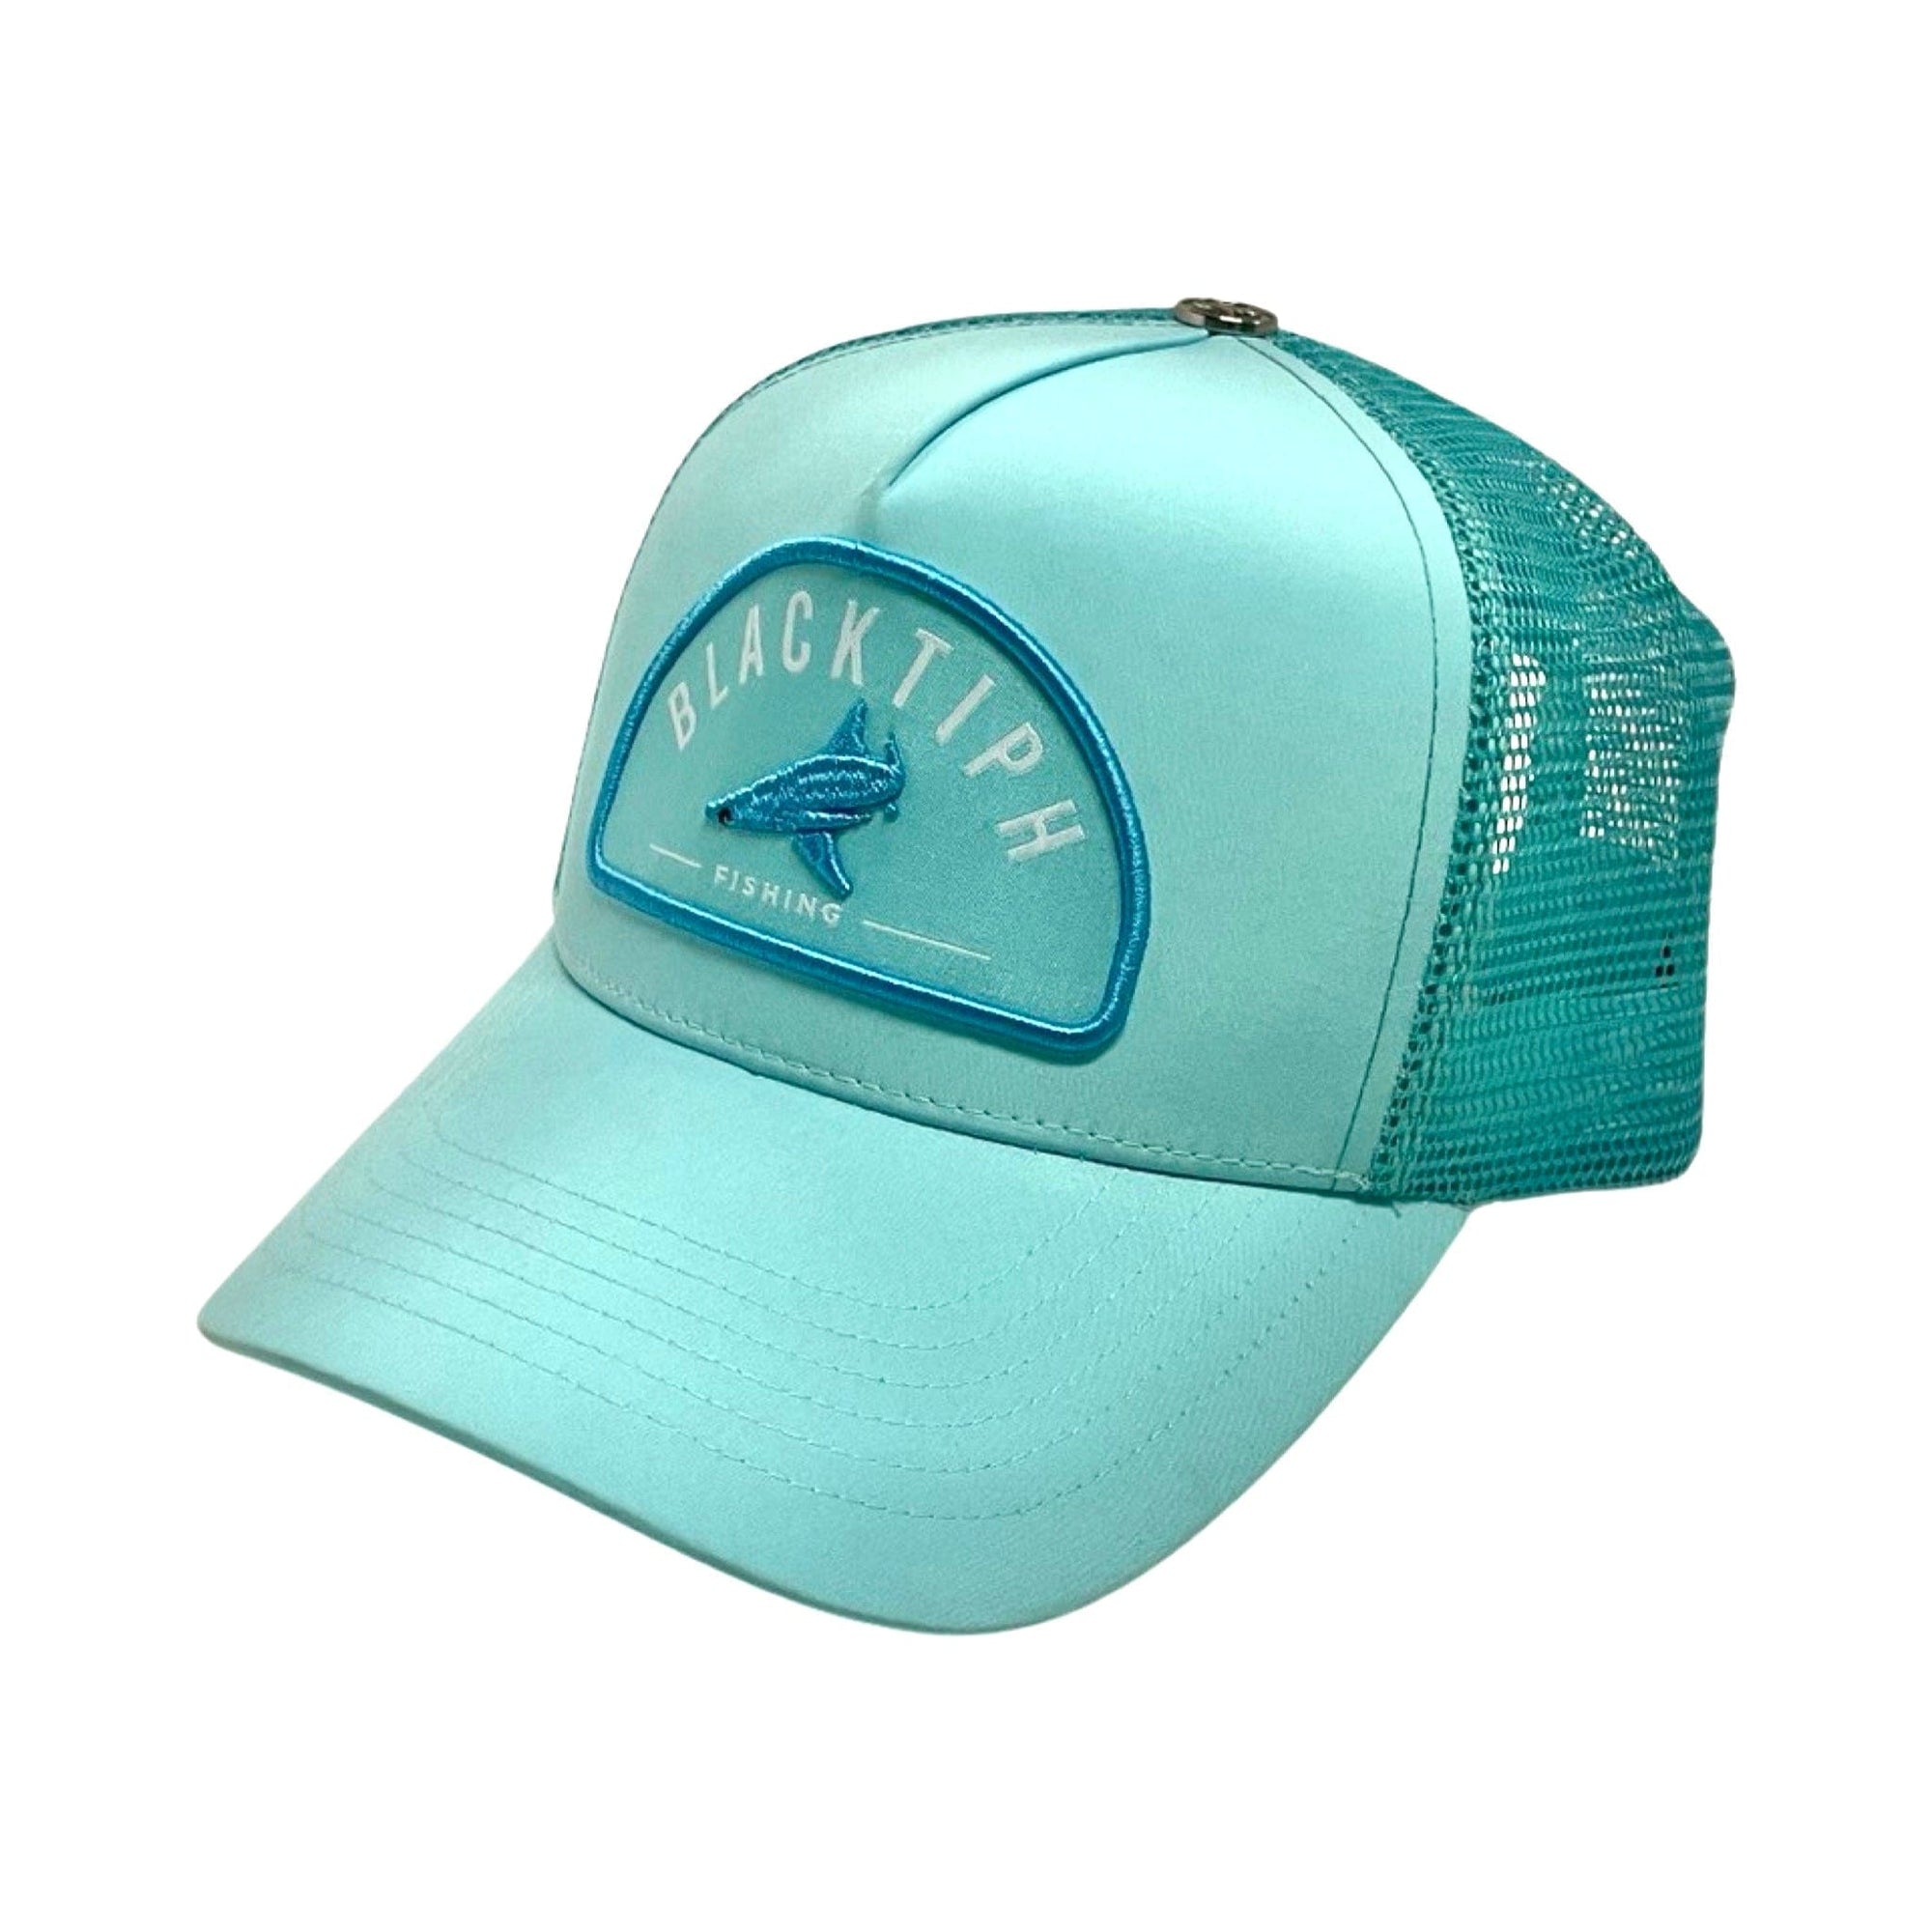 BlacktipH Hats BlacktipH Snapback Hat with New Patch in Teal